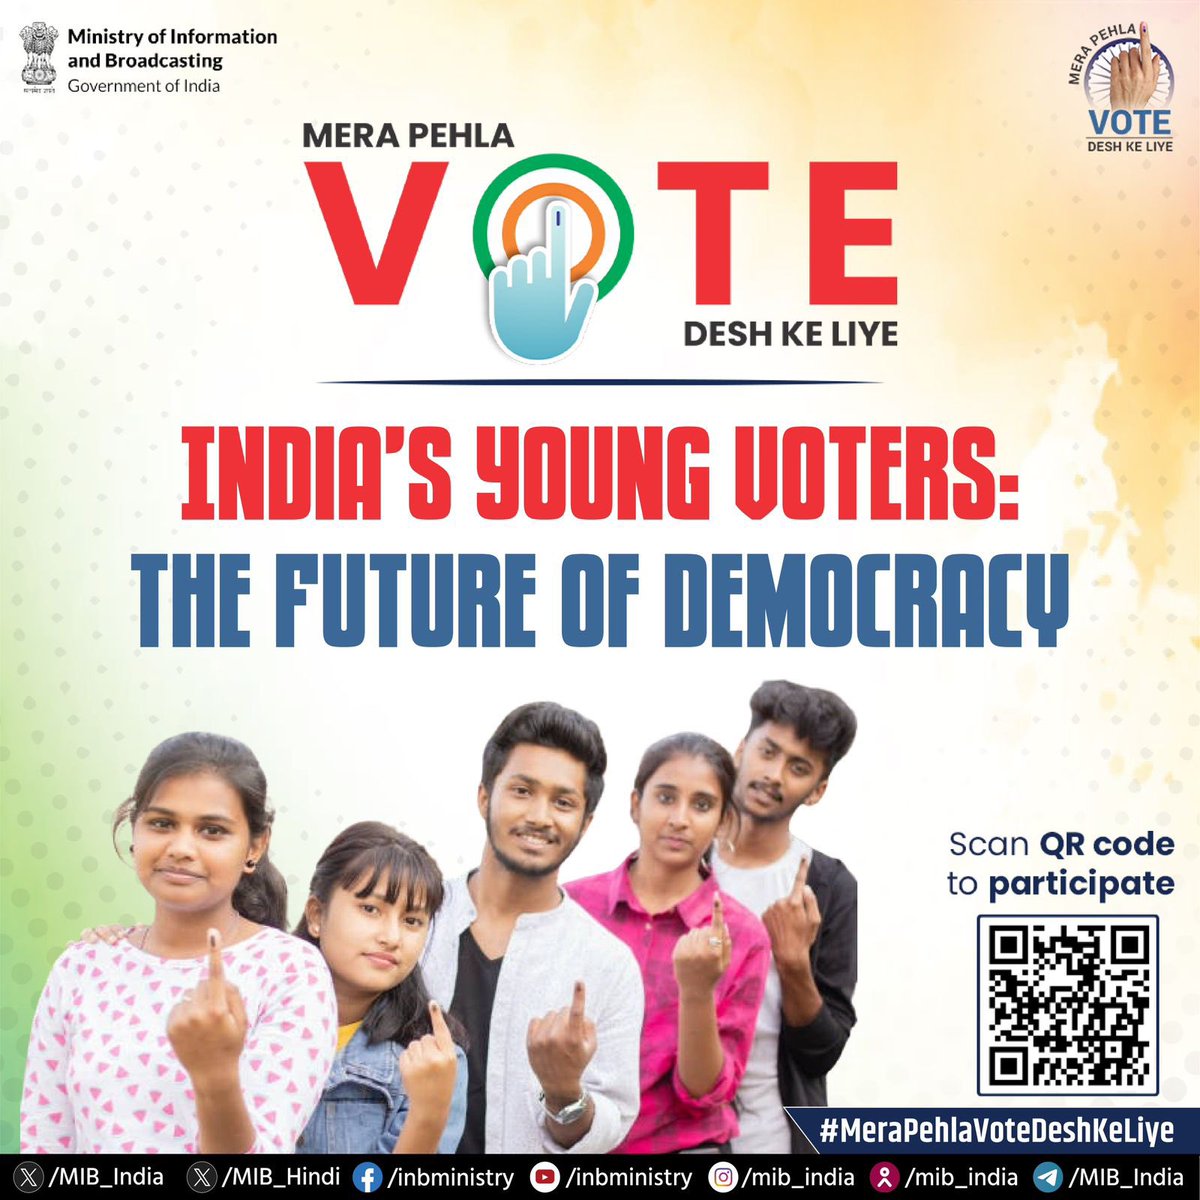 🔱Your first vote serves a voice, a chance to shape the future. Let's do this! 💪 I call out all the fellow citizens to actively participate in #MeraPehlaVoteDeshKeLiye